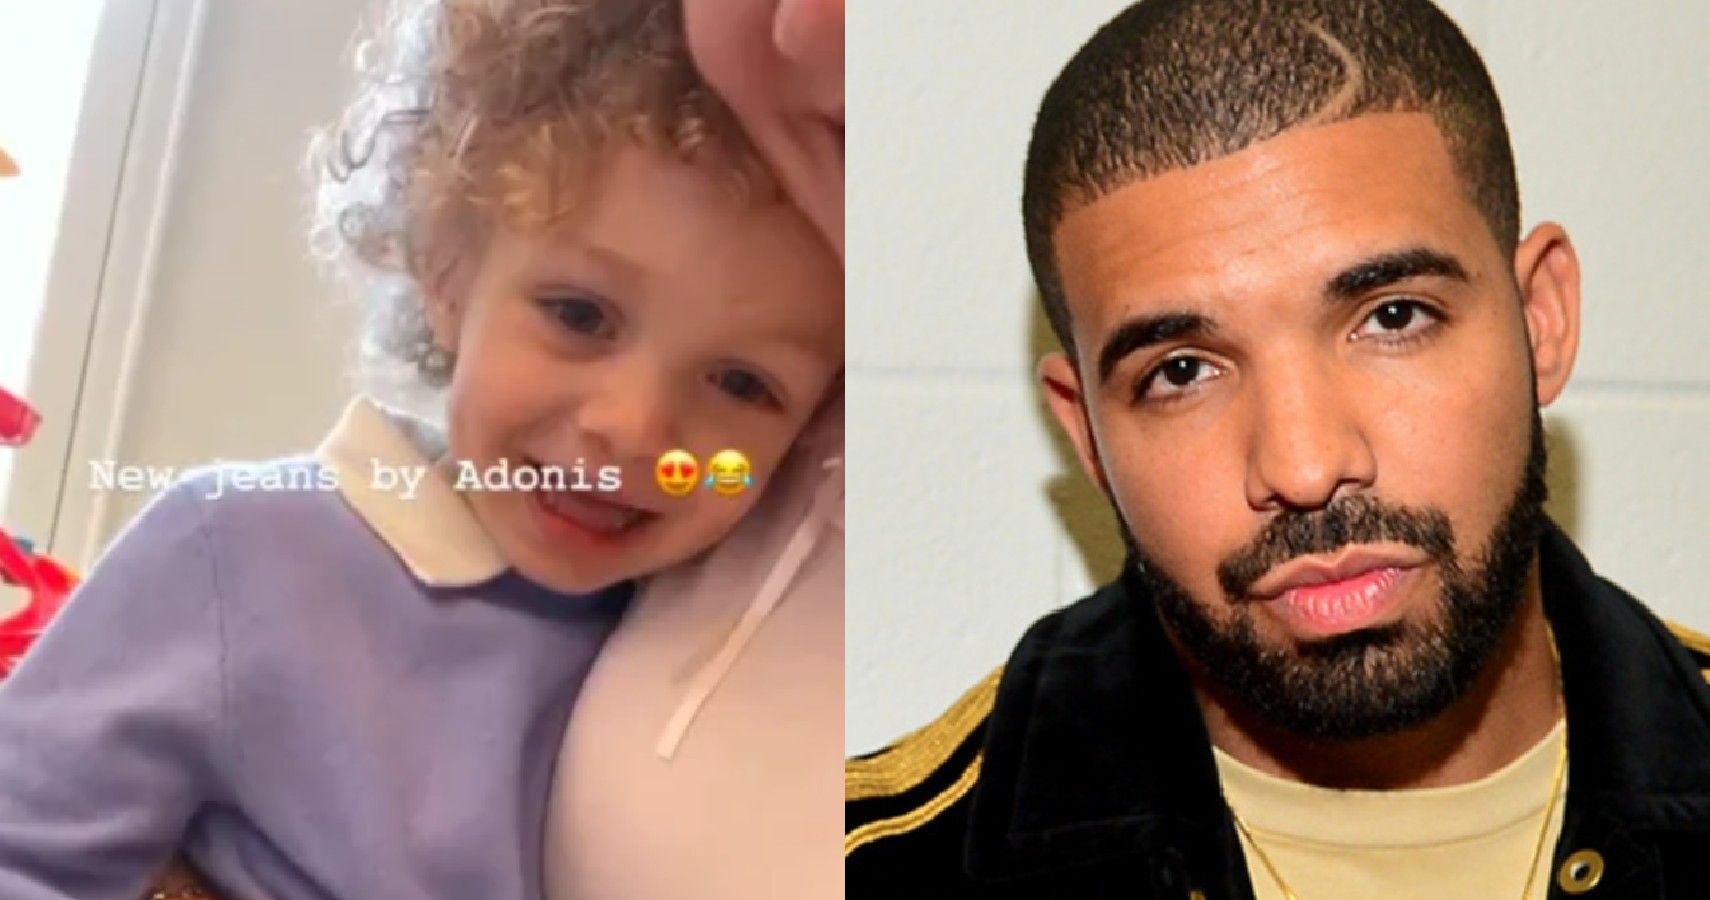 Drake's 2Year Old Son Adonis Does Arts & Crafts In Adorable New Video